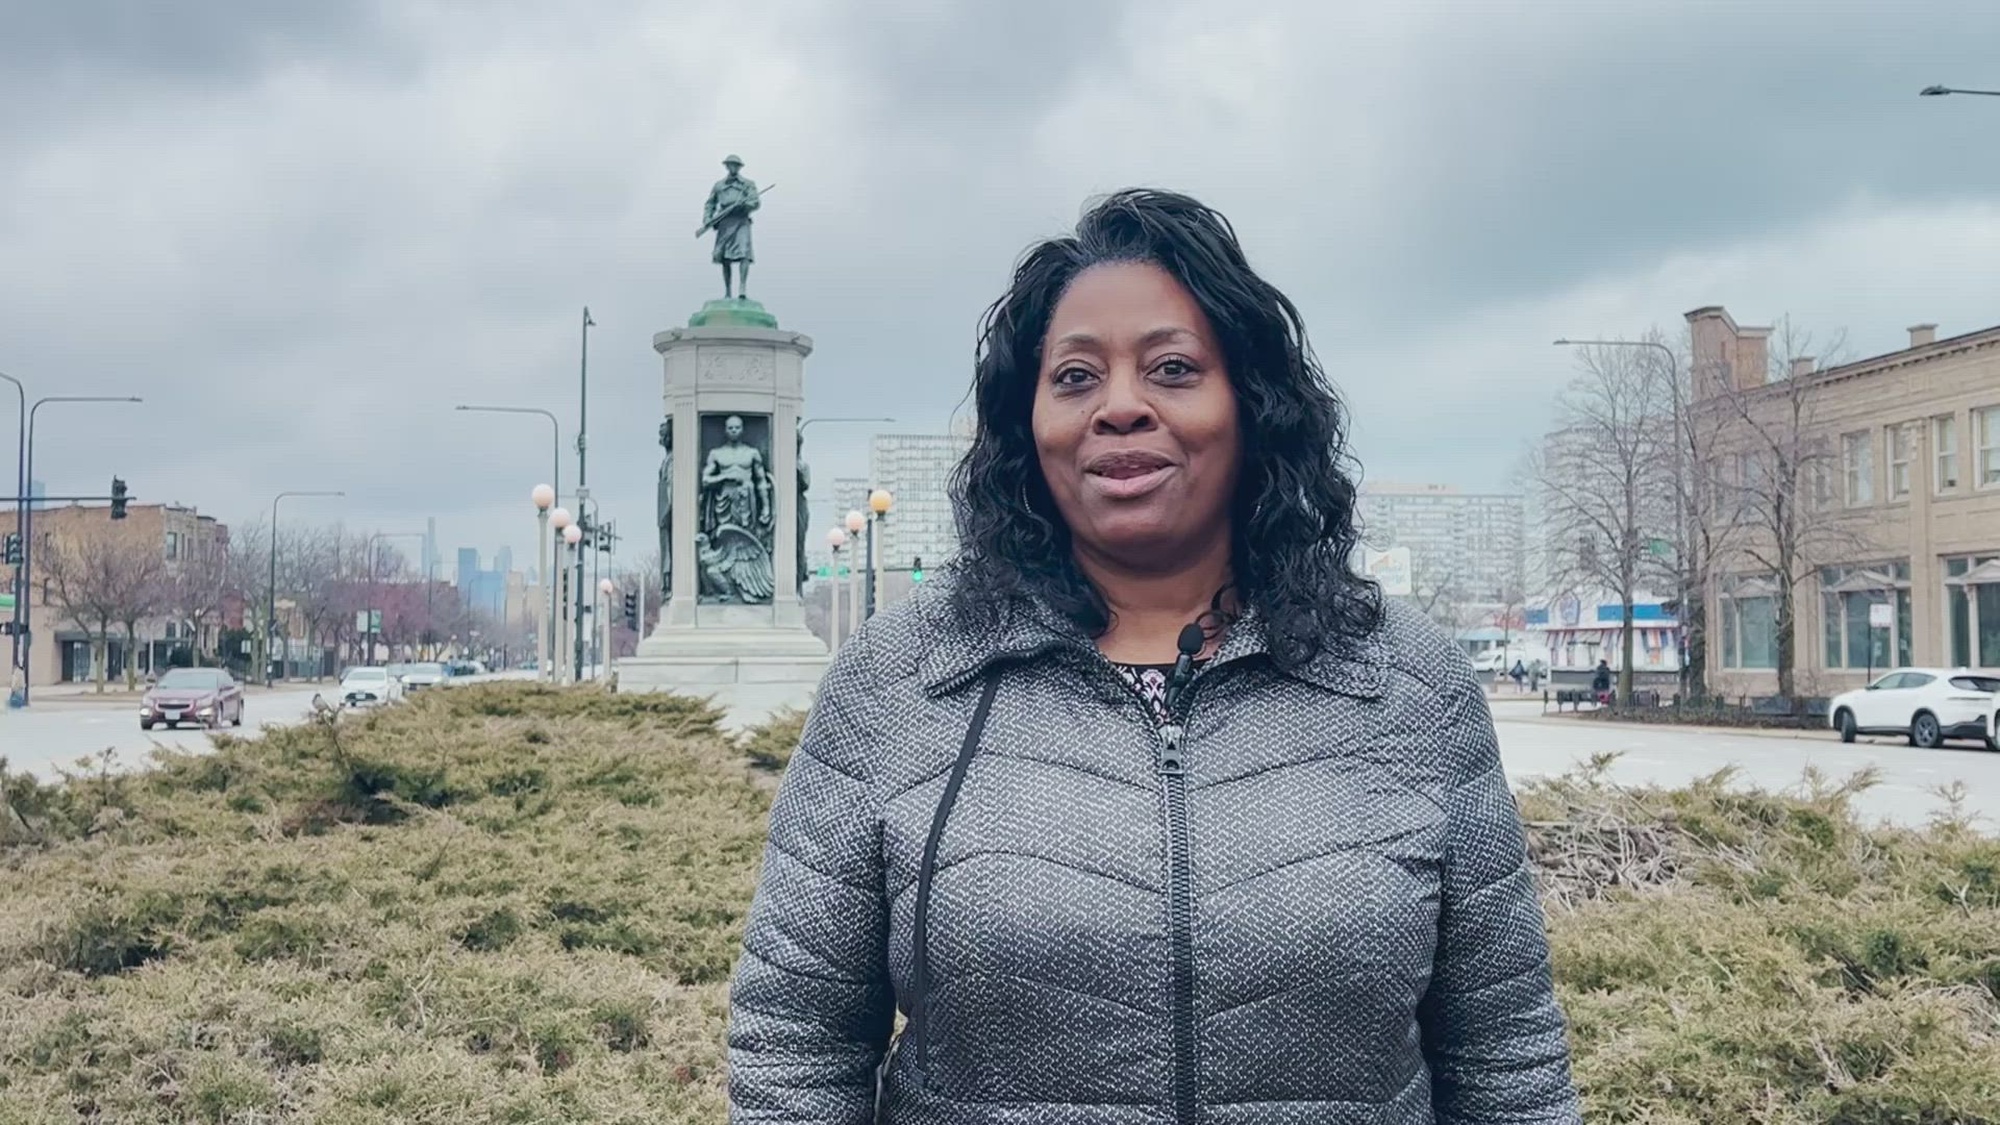 This year for the African American/Black History Month observance, Mrs. Yolanda Webb, the Military Equal Opportunity Specialist, 85th U.S. Army Reserve Support Command, visited Chicago, in a self-guided tour, to explore Chicago's Black Renaissance.
(U.S. Army Reserve video by Anthony L. Taylor)